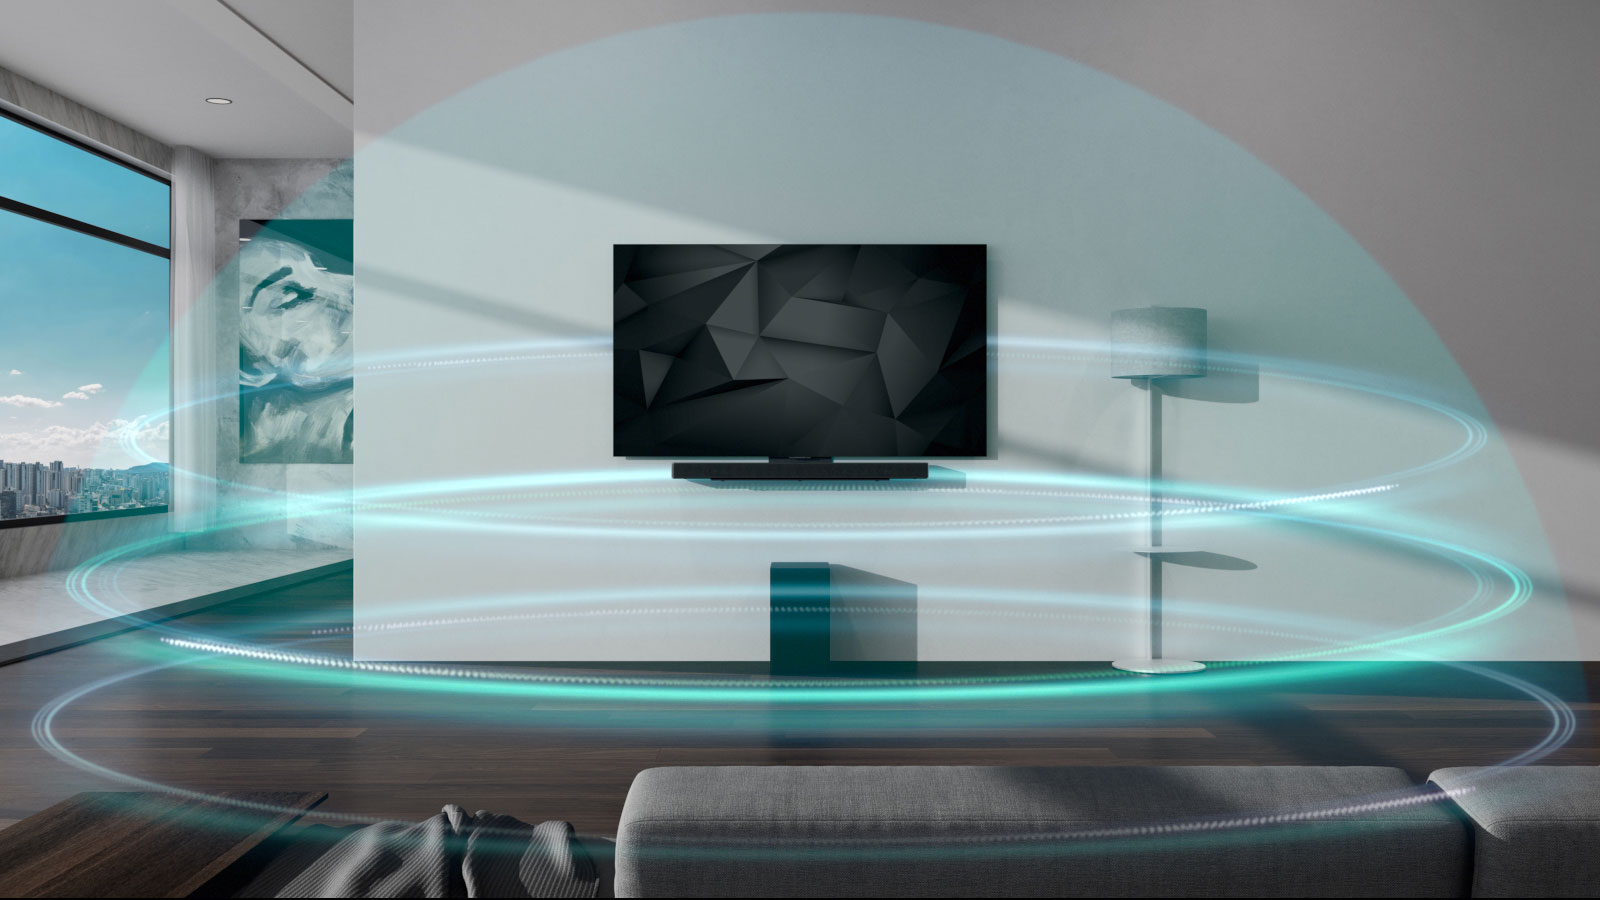 LG SC9S Blue dome-shaped, 3 layered sound wavers are covering Sound bar and TV hung on the wall in the living room.